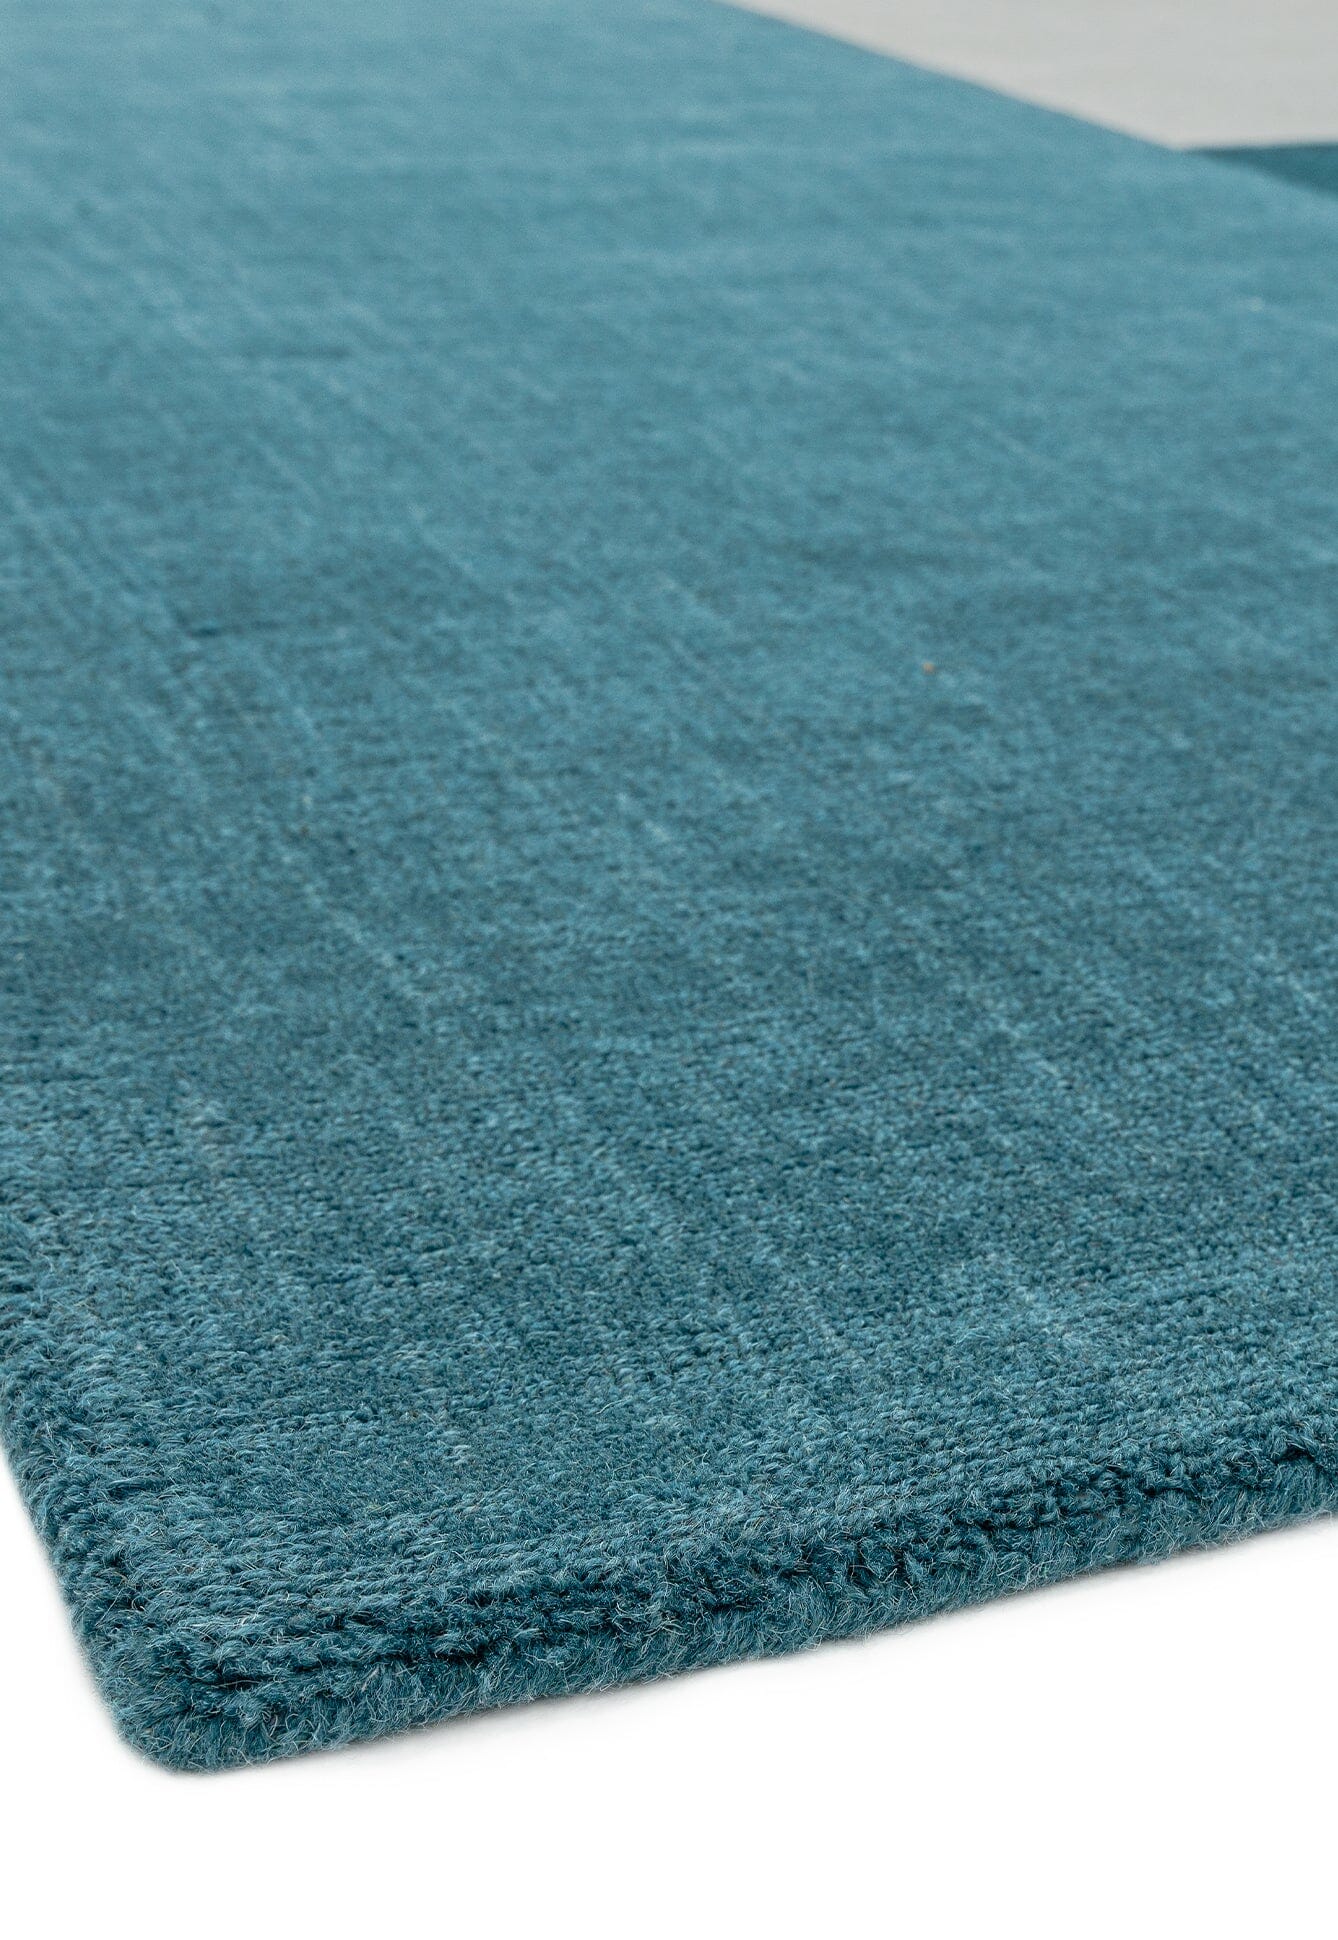 Asiatic Carpets Blox Hand Woven Rug Teal - 120 x 170cm